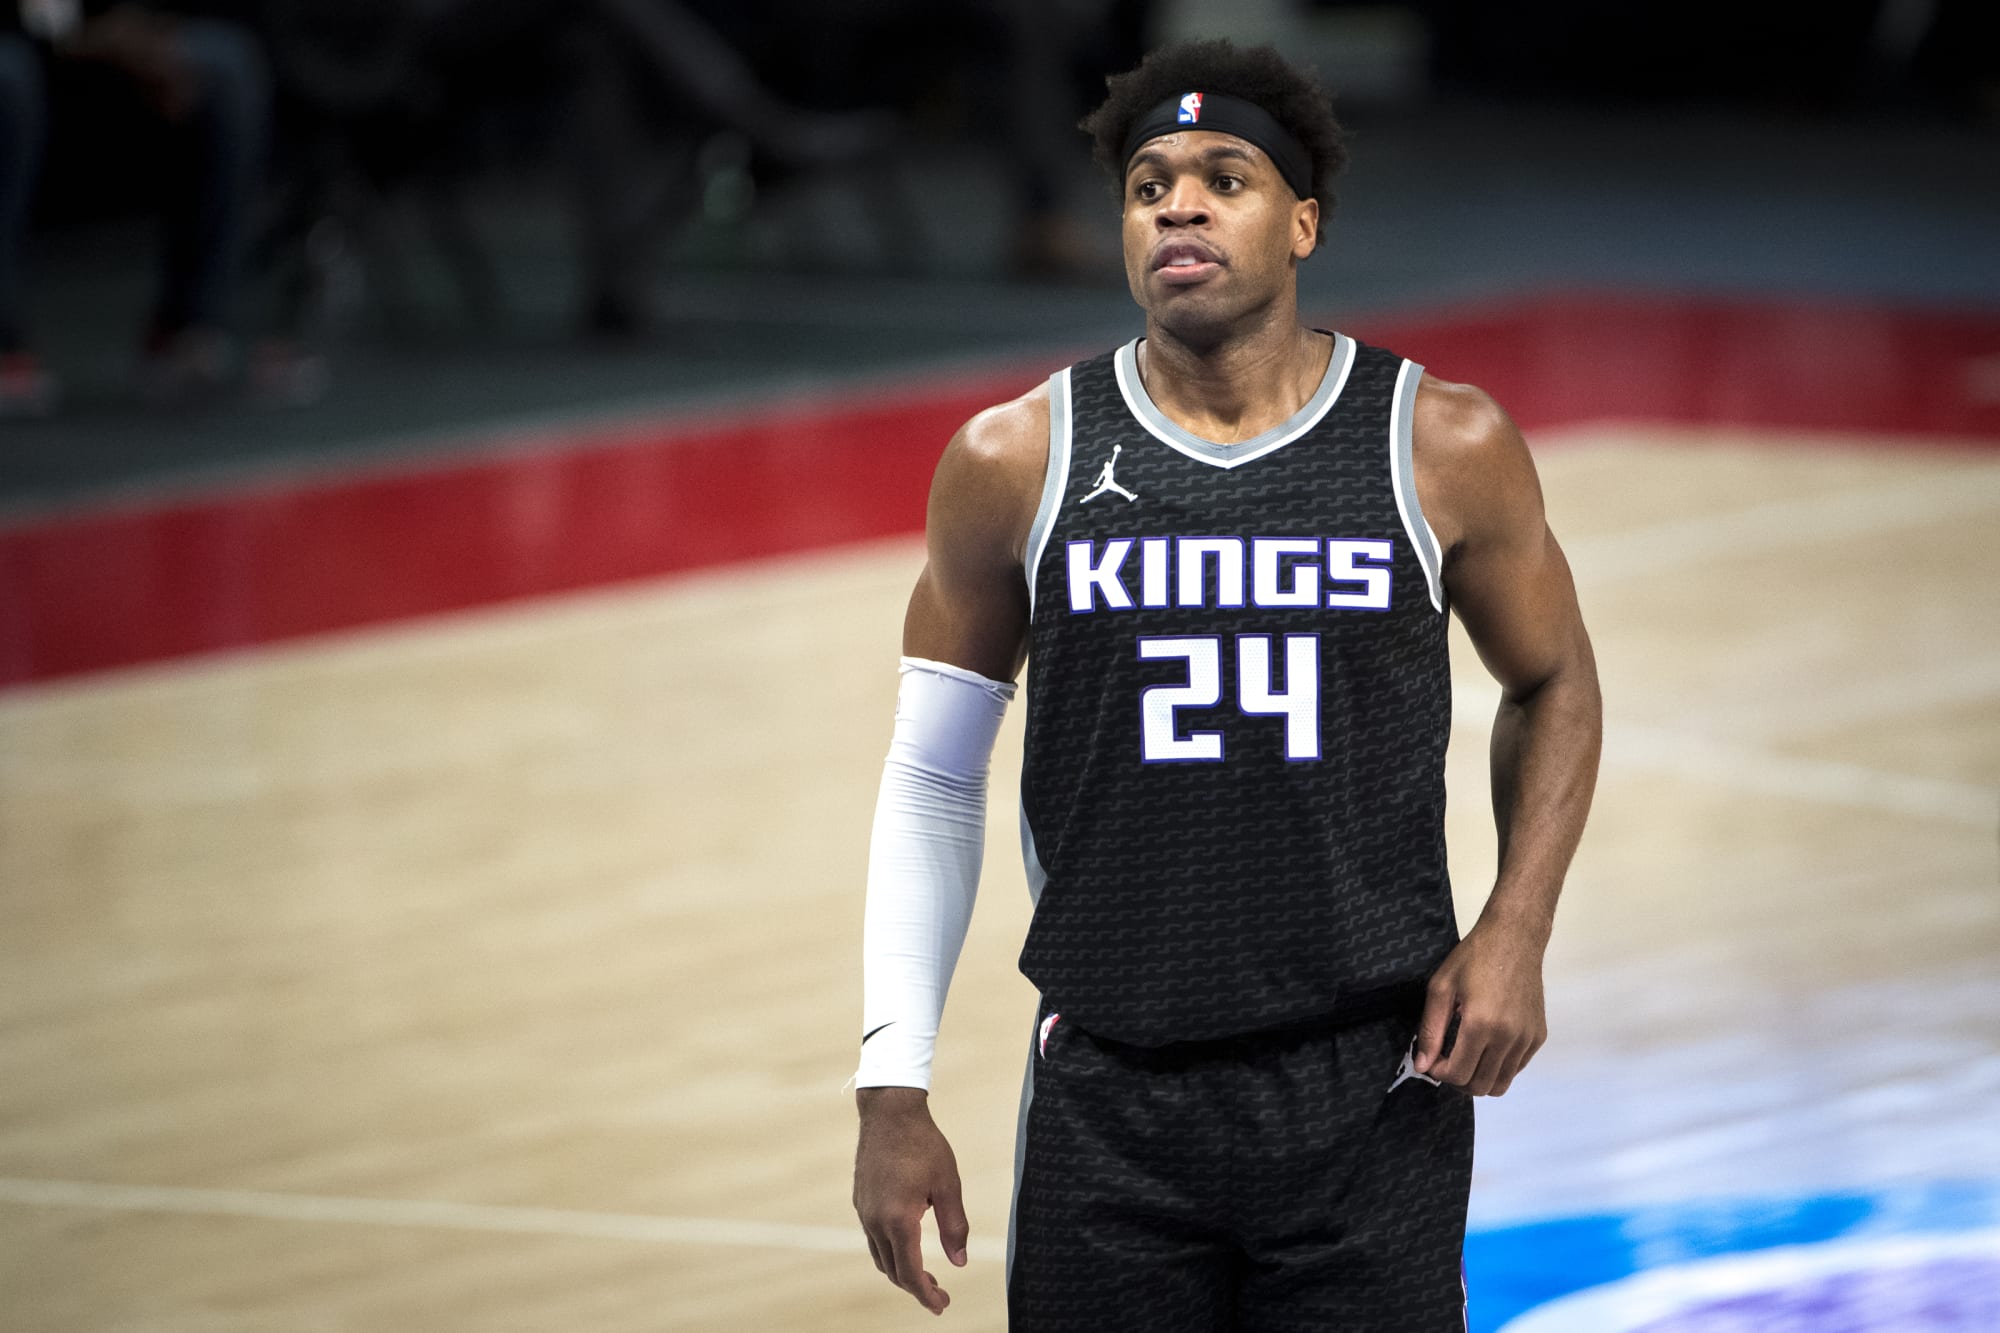 Near-trade to Lakers in offseason not weighing on Buddy Hield's mind